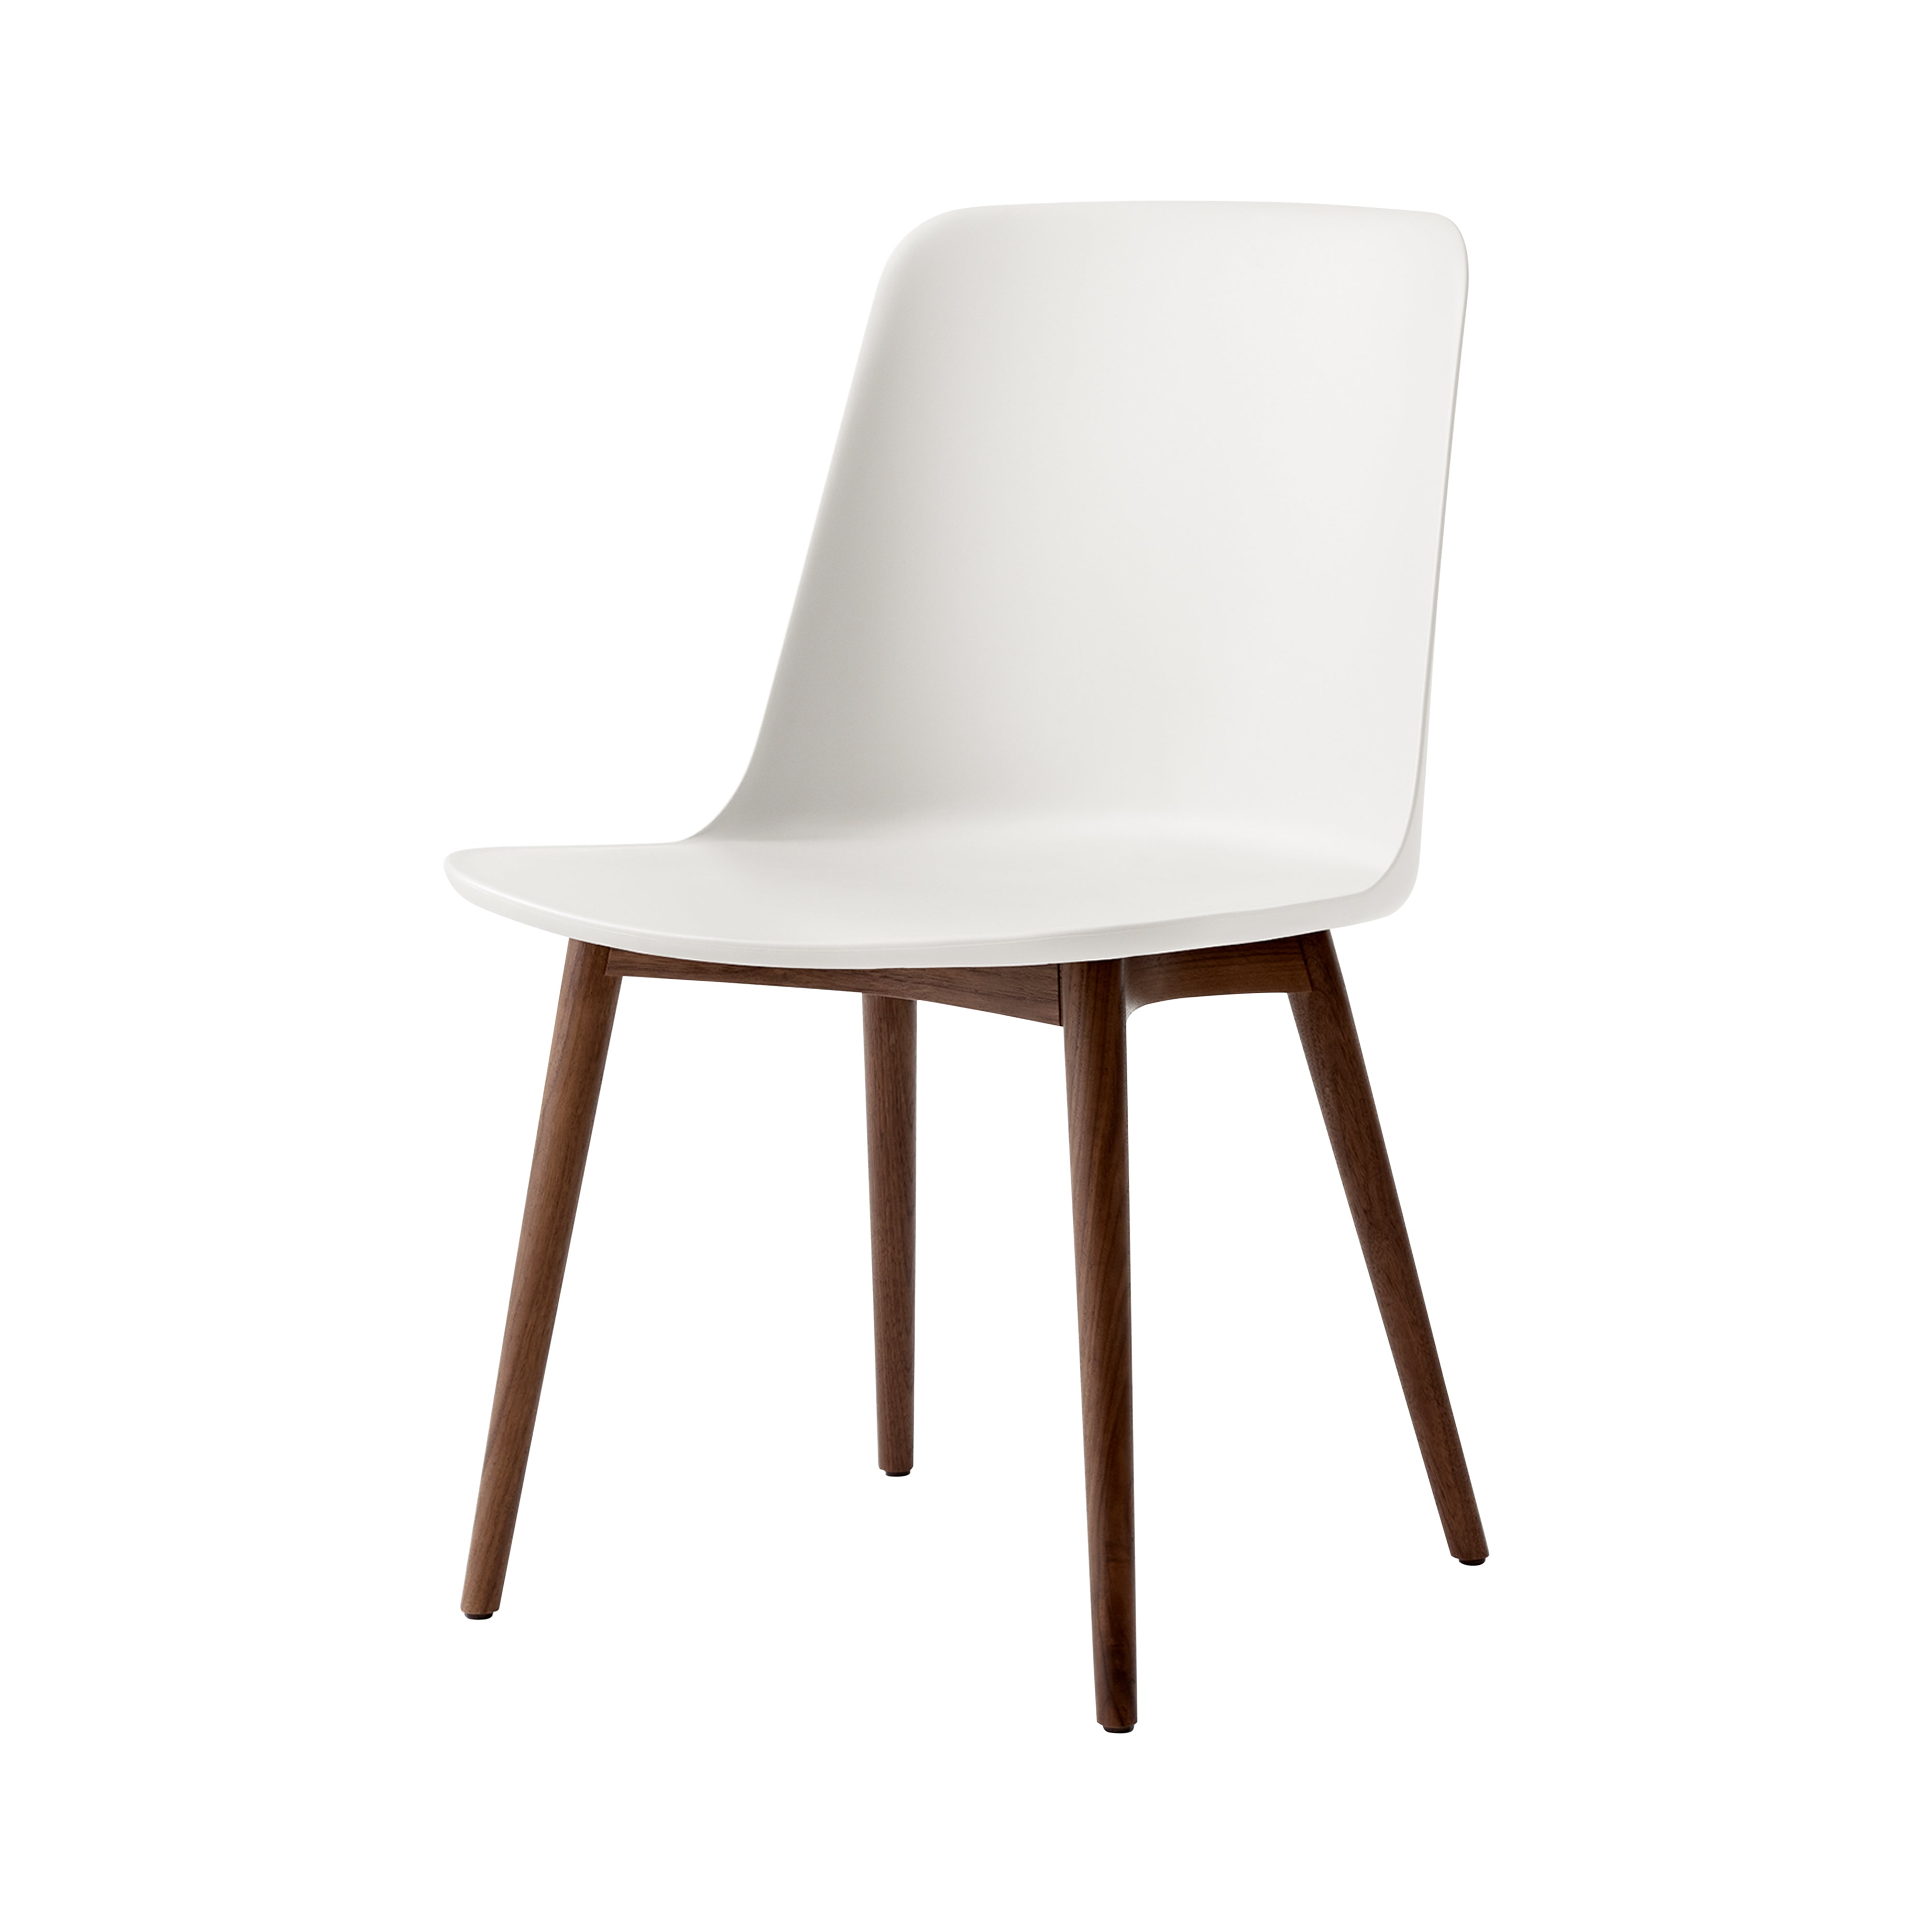 Rely Chair HW71: Walnut + White